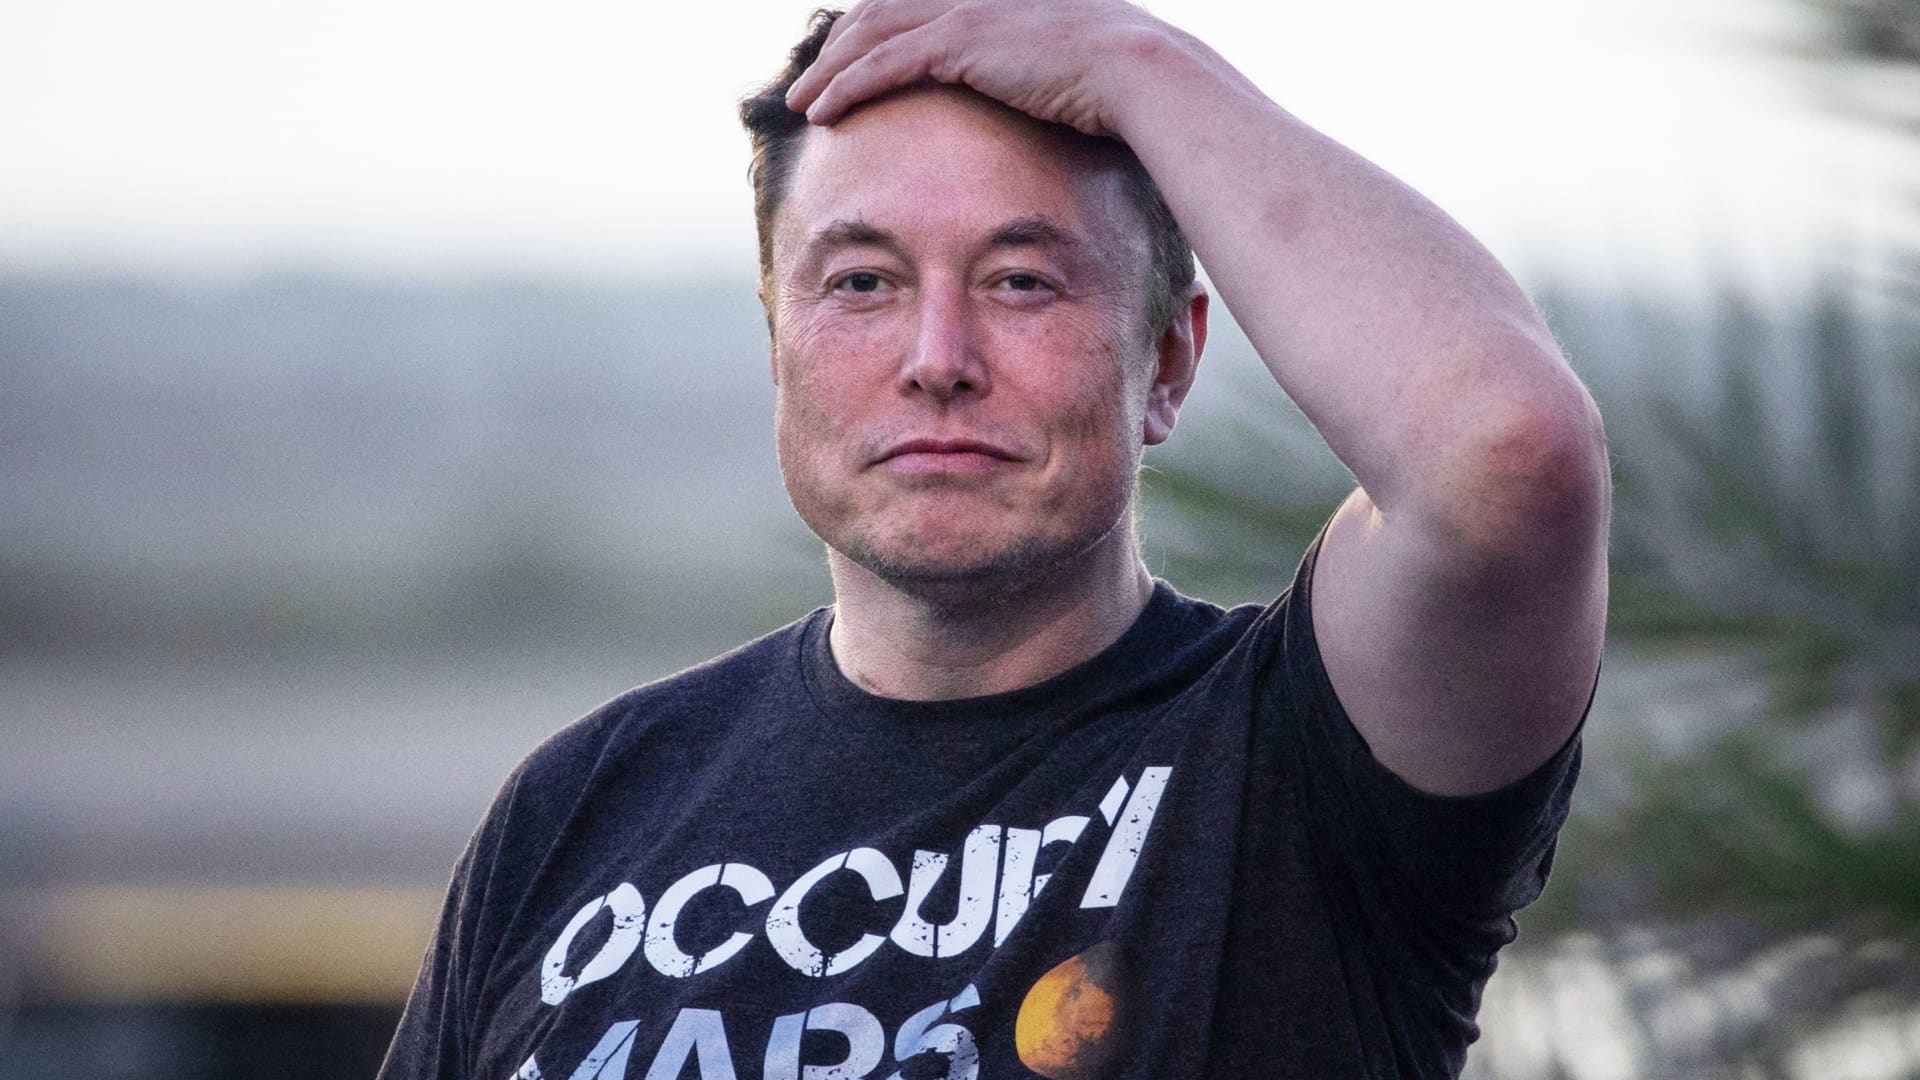 Apple and Elon Musk’s Twitter are on a collision course